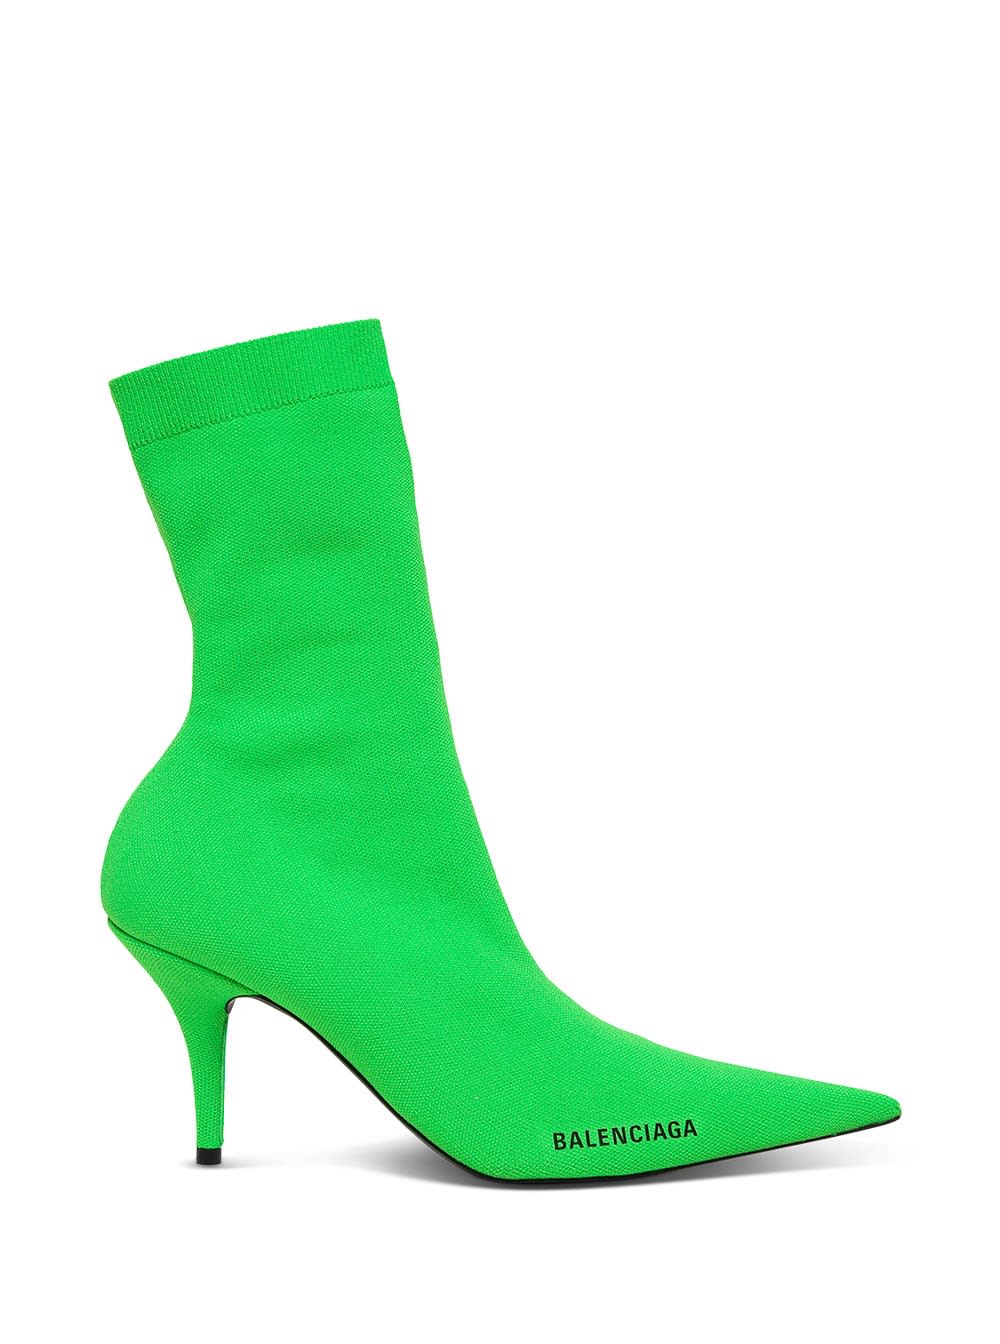 Buy Balenciaga Knife Ankle Boots With Logo online, shop Balenciaga shoes with free shipping